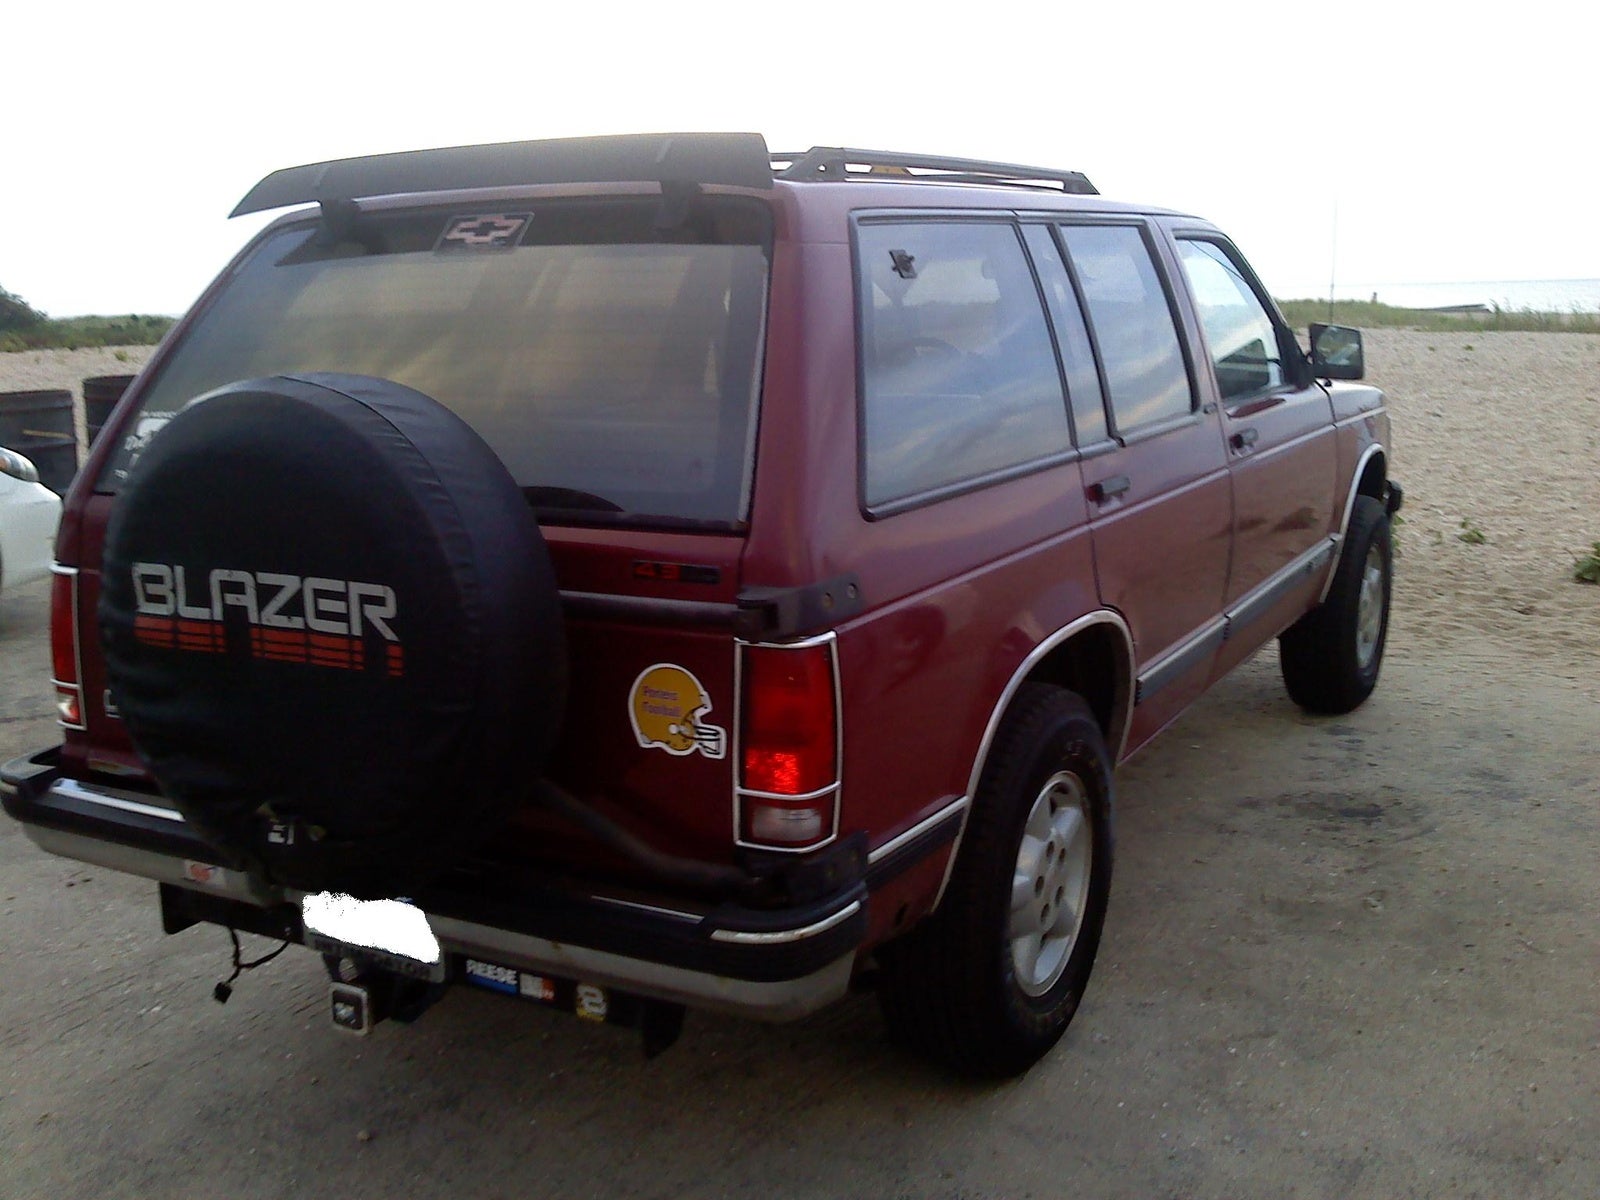 Picture Of 1991 Chevrolet S 10 Blazer 4 Dr Std 4wd Suv Exterior 478038.